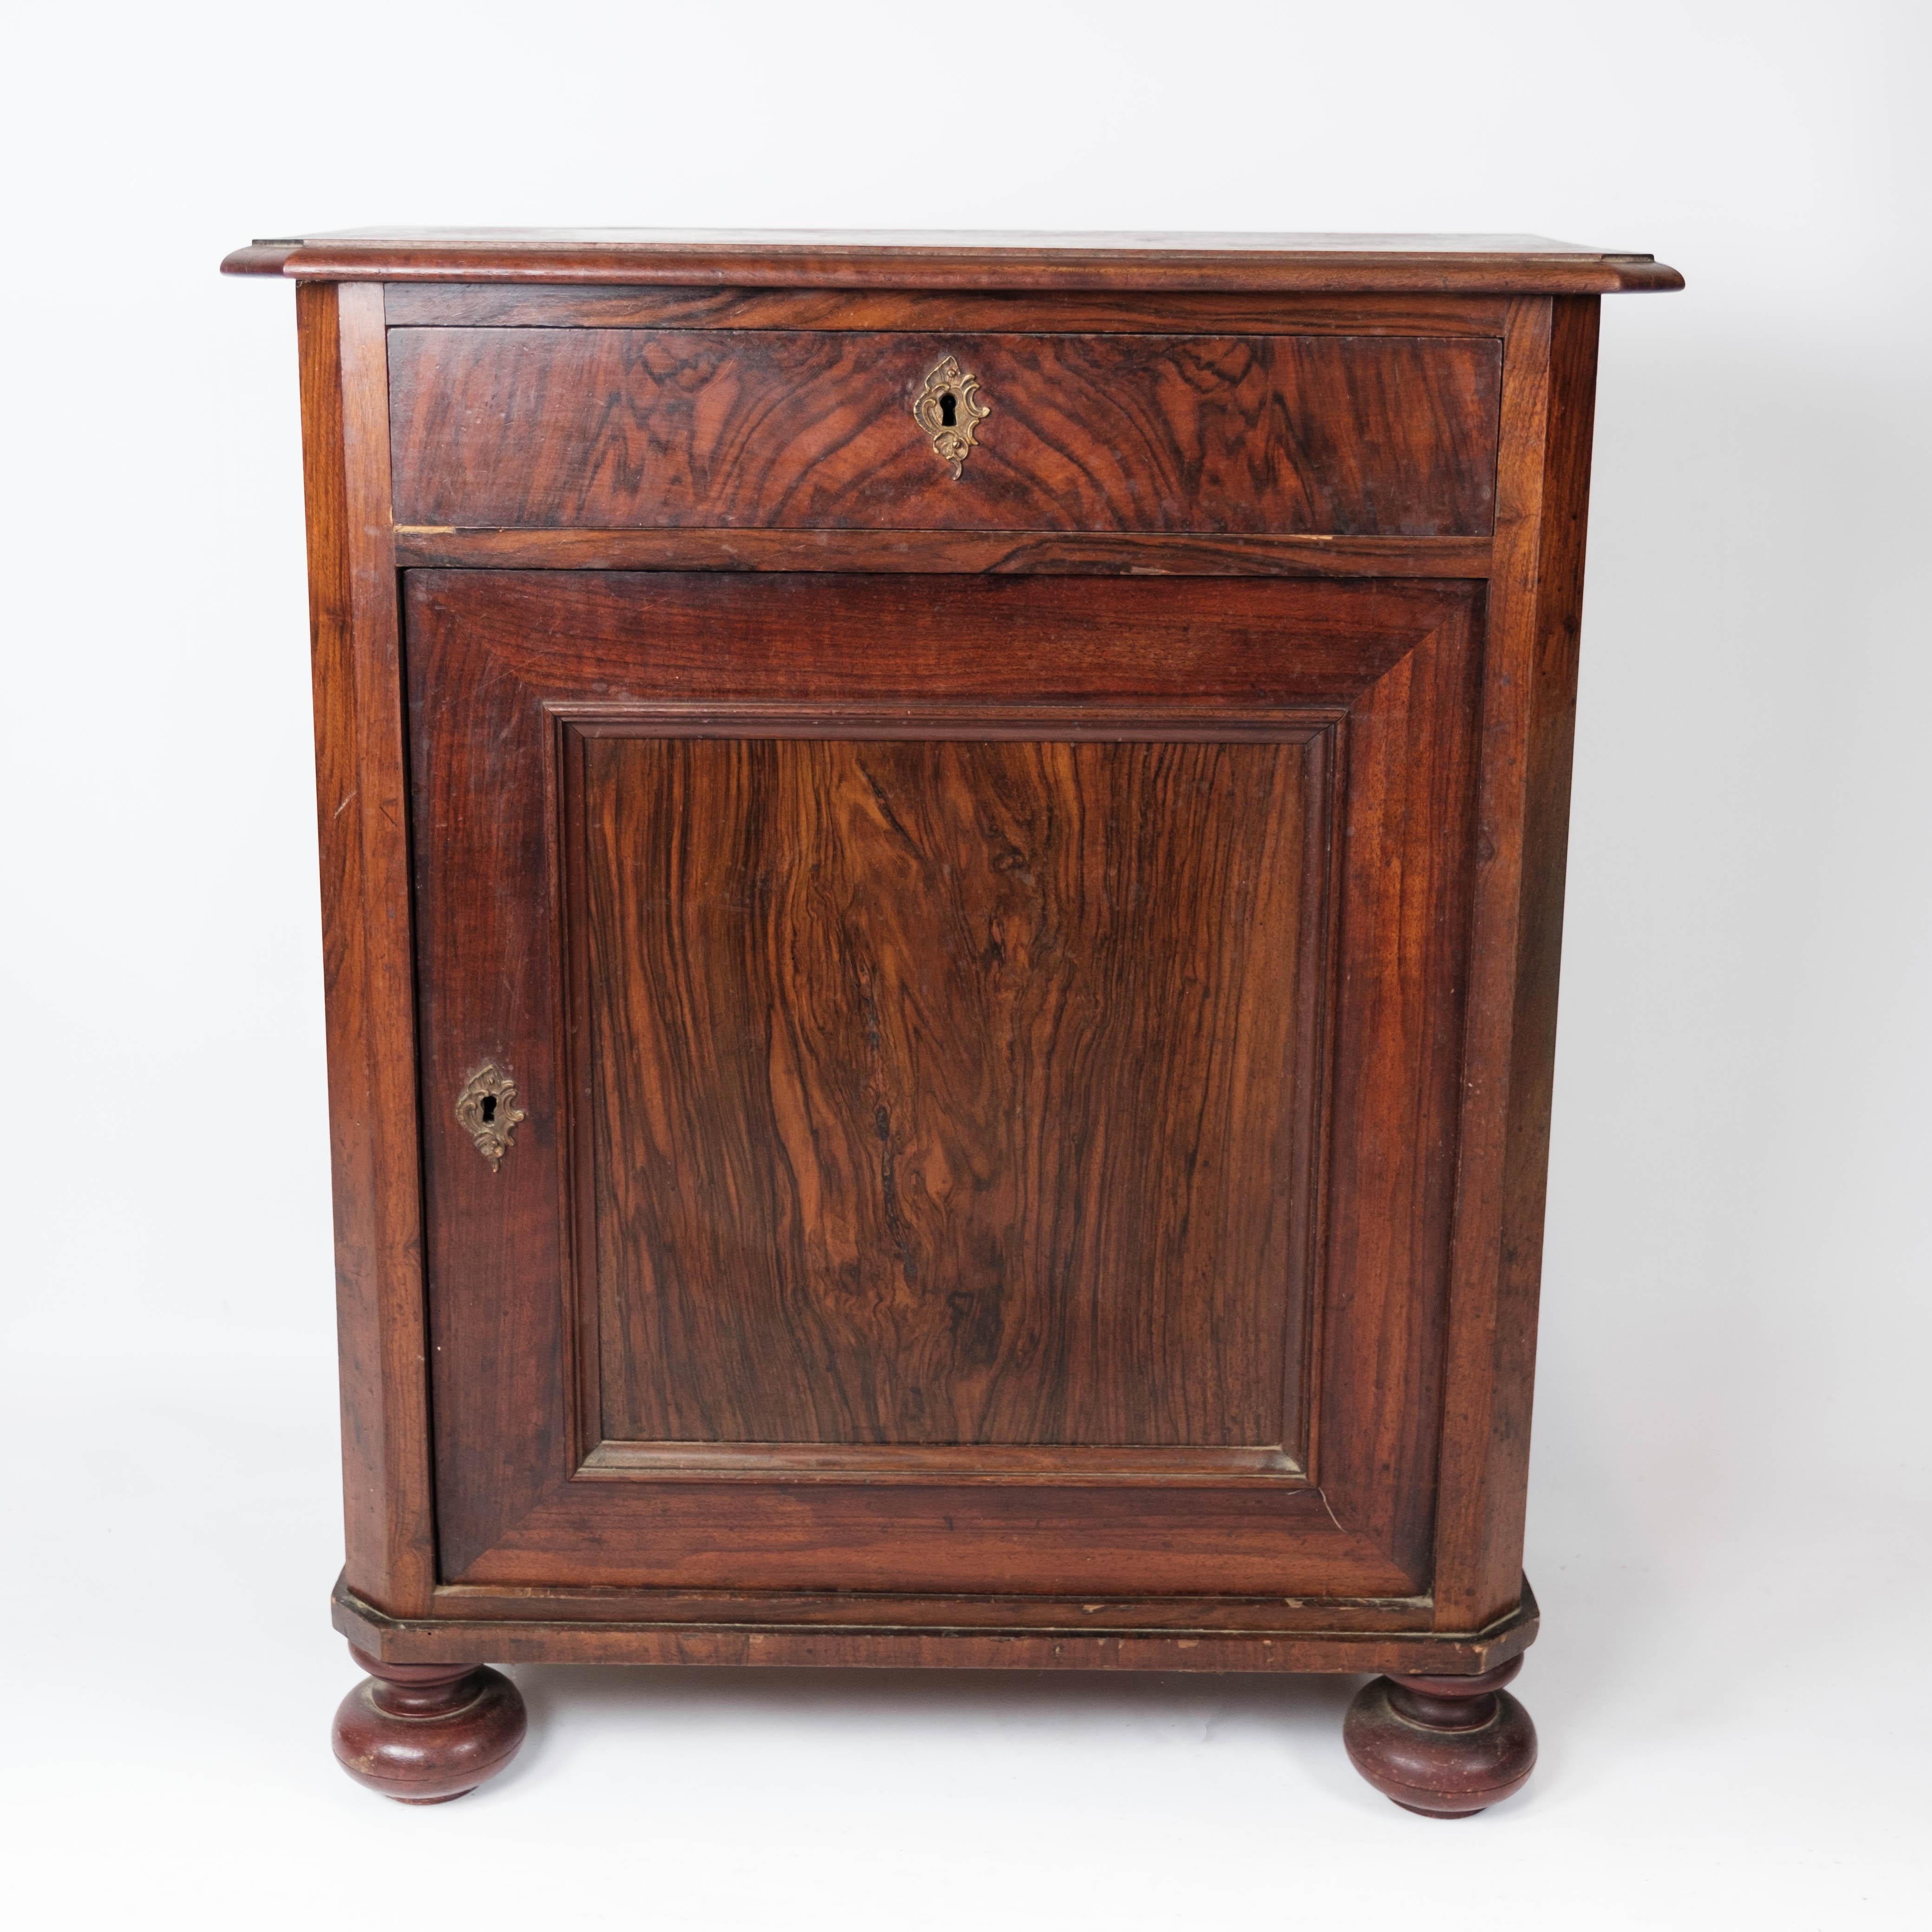 Smaller cabinet of mahogany in great antique condition, from the 1860s.